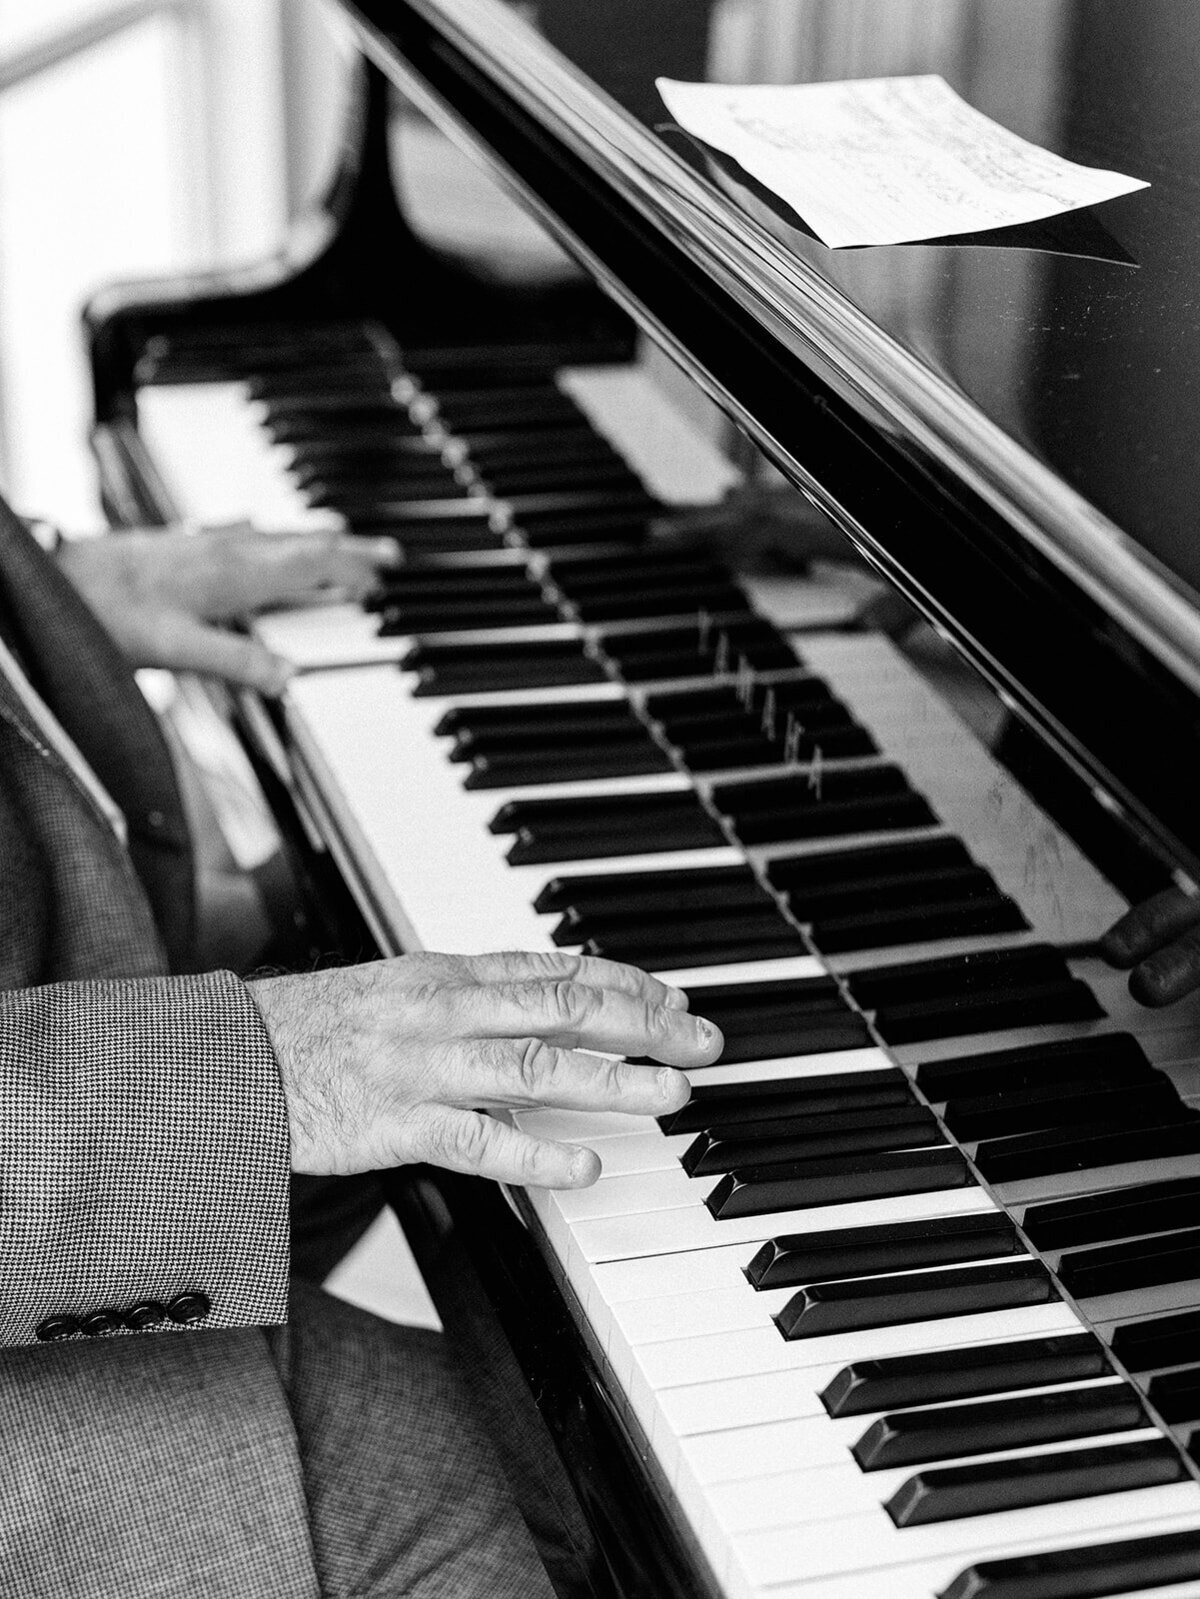 Piano and hands playing it in a black and white photo